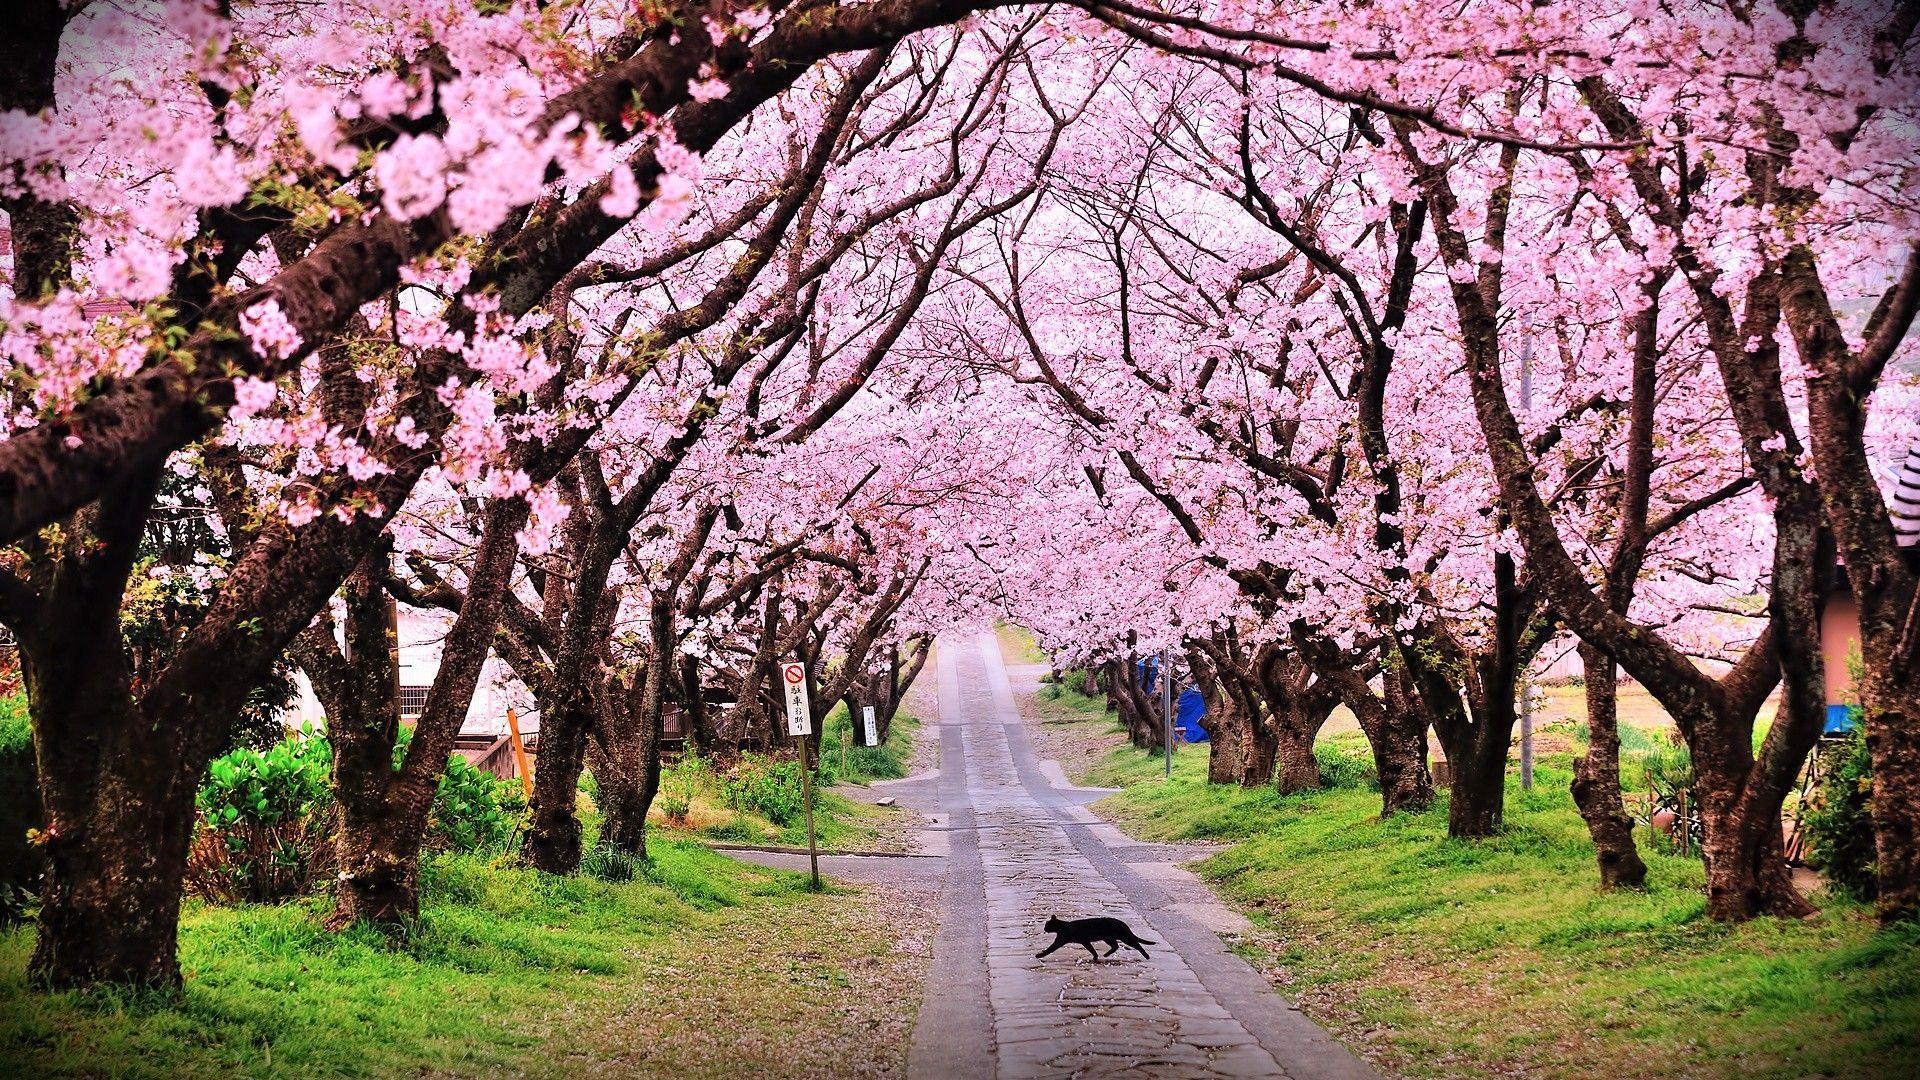 Wallpaper Beautiful Natural Tree With Pink Flower And Running Cat On